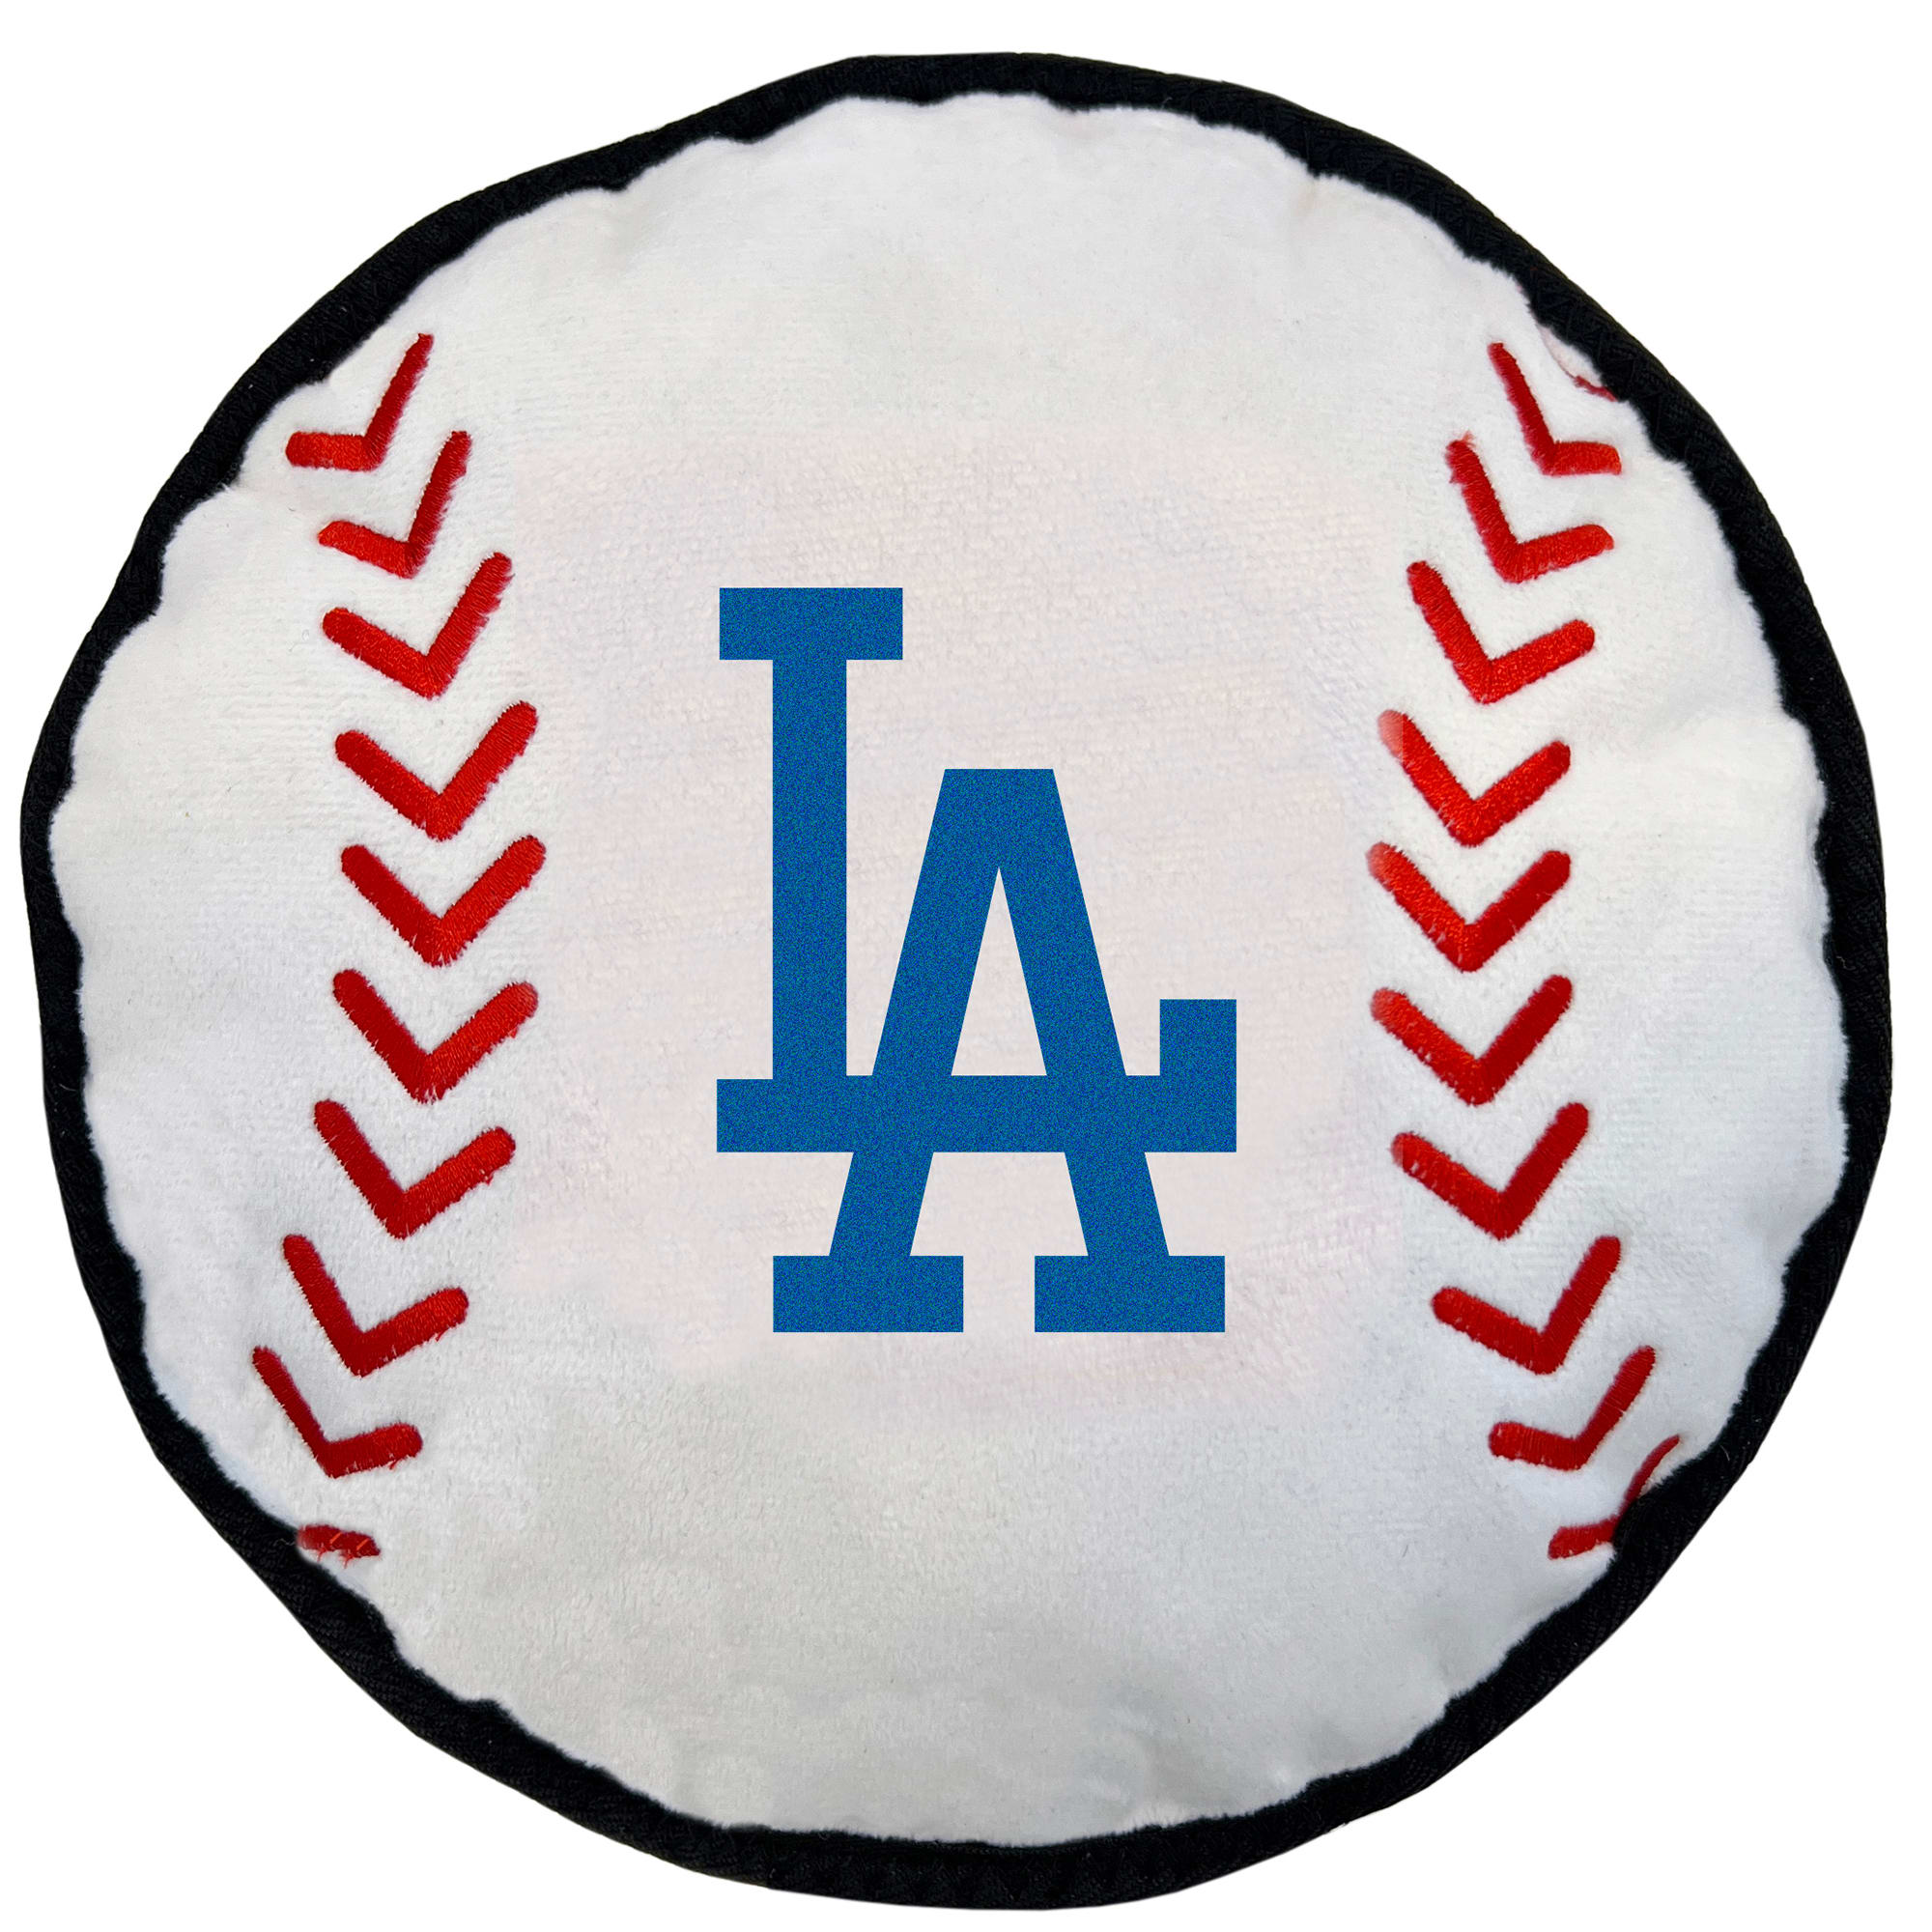 Pet Supplies : Pets First MLB Los Angeles Dodgers Plush Dog Toys